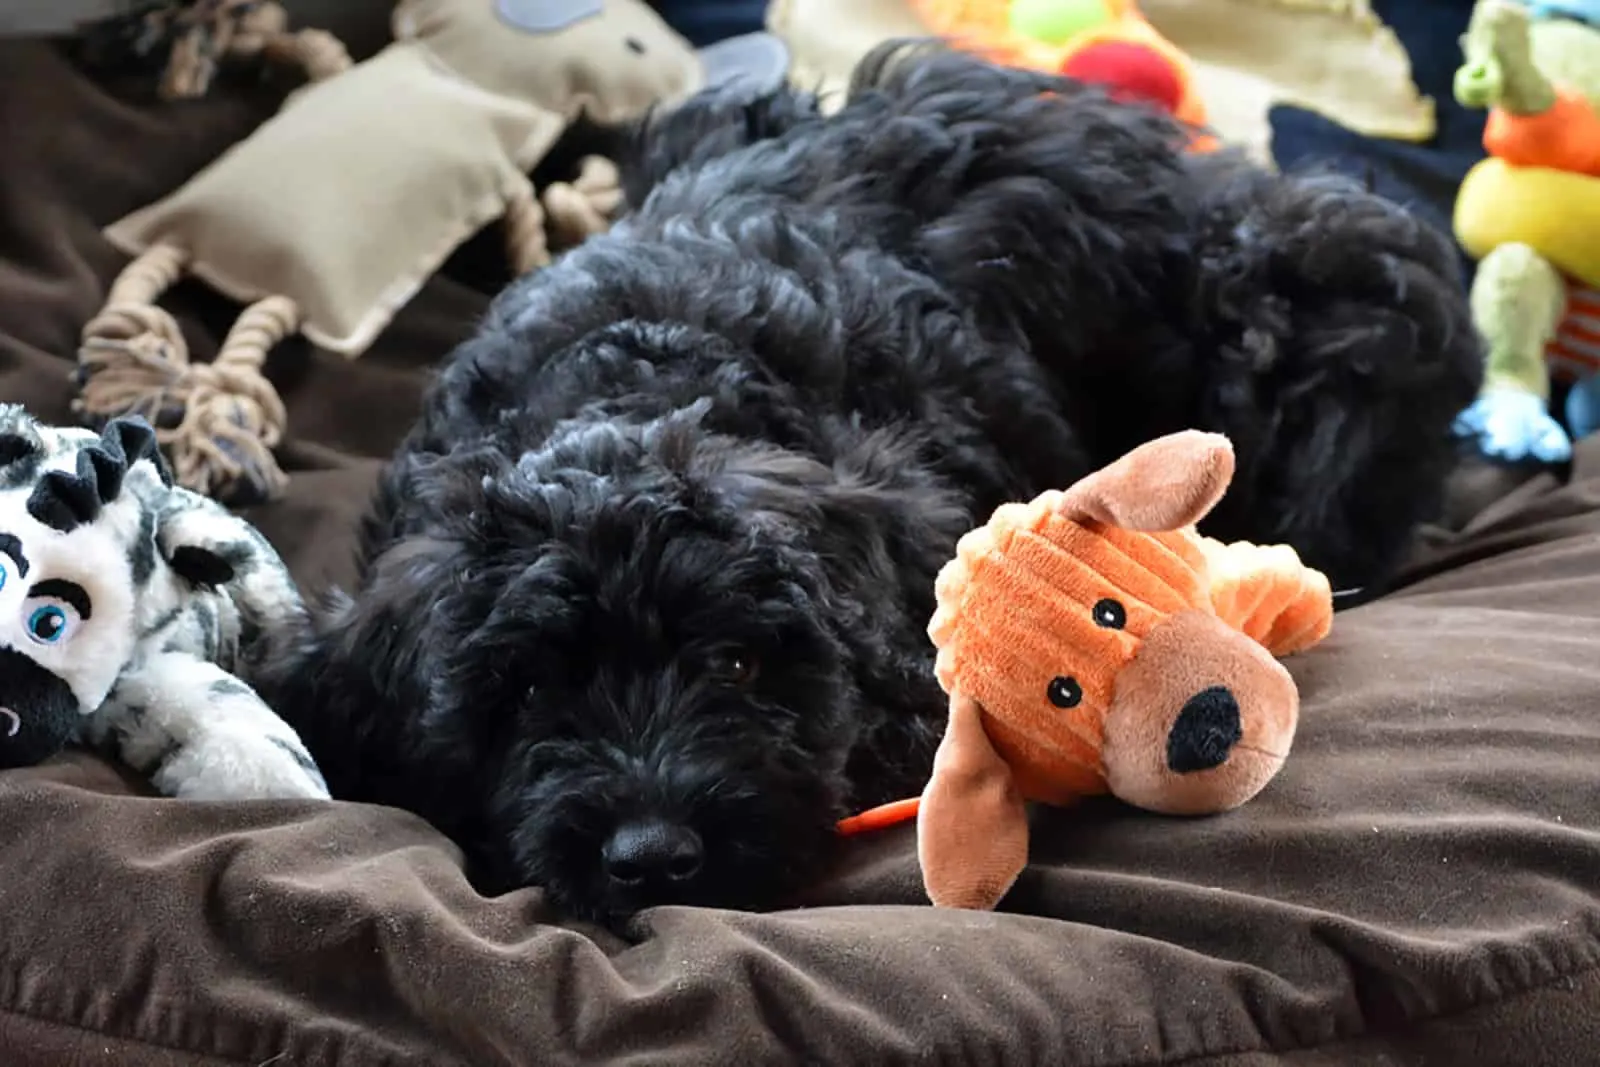 bouvier des flandres puppy lying on the bed